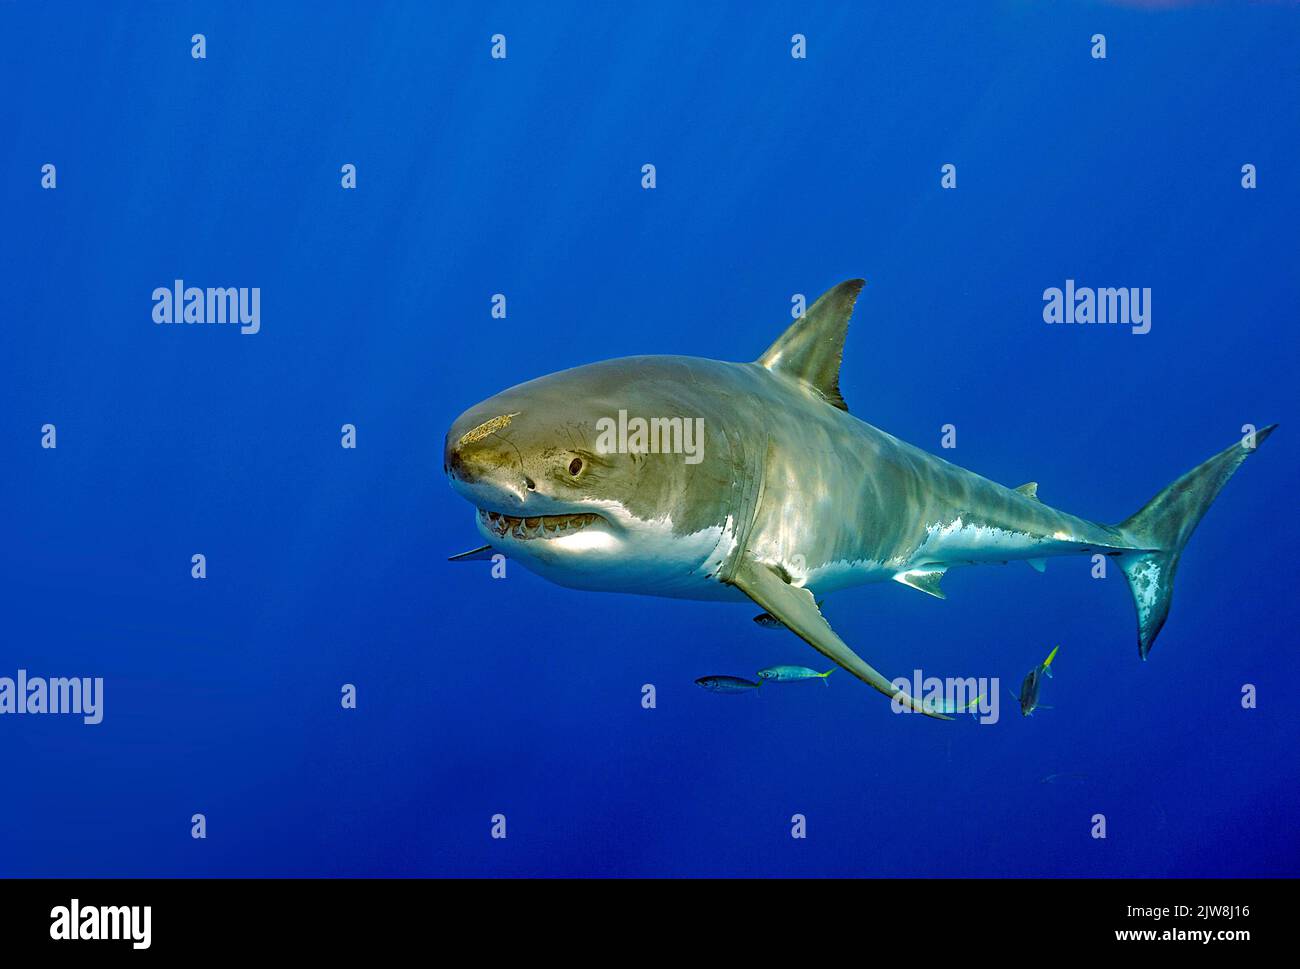 Great white shark (Carcharodon carcharias) in blue water, Guadalupe Island, Mexico, Pacific Ocean Stock Photo